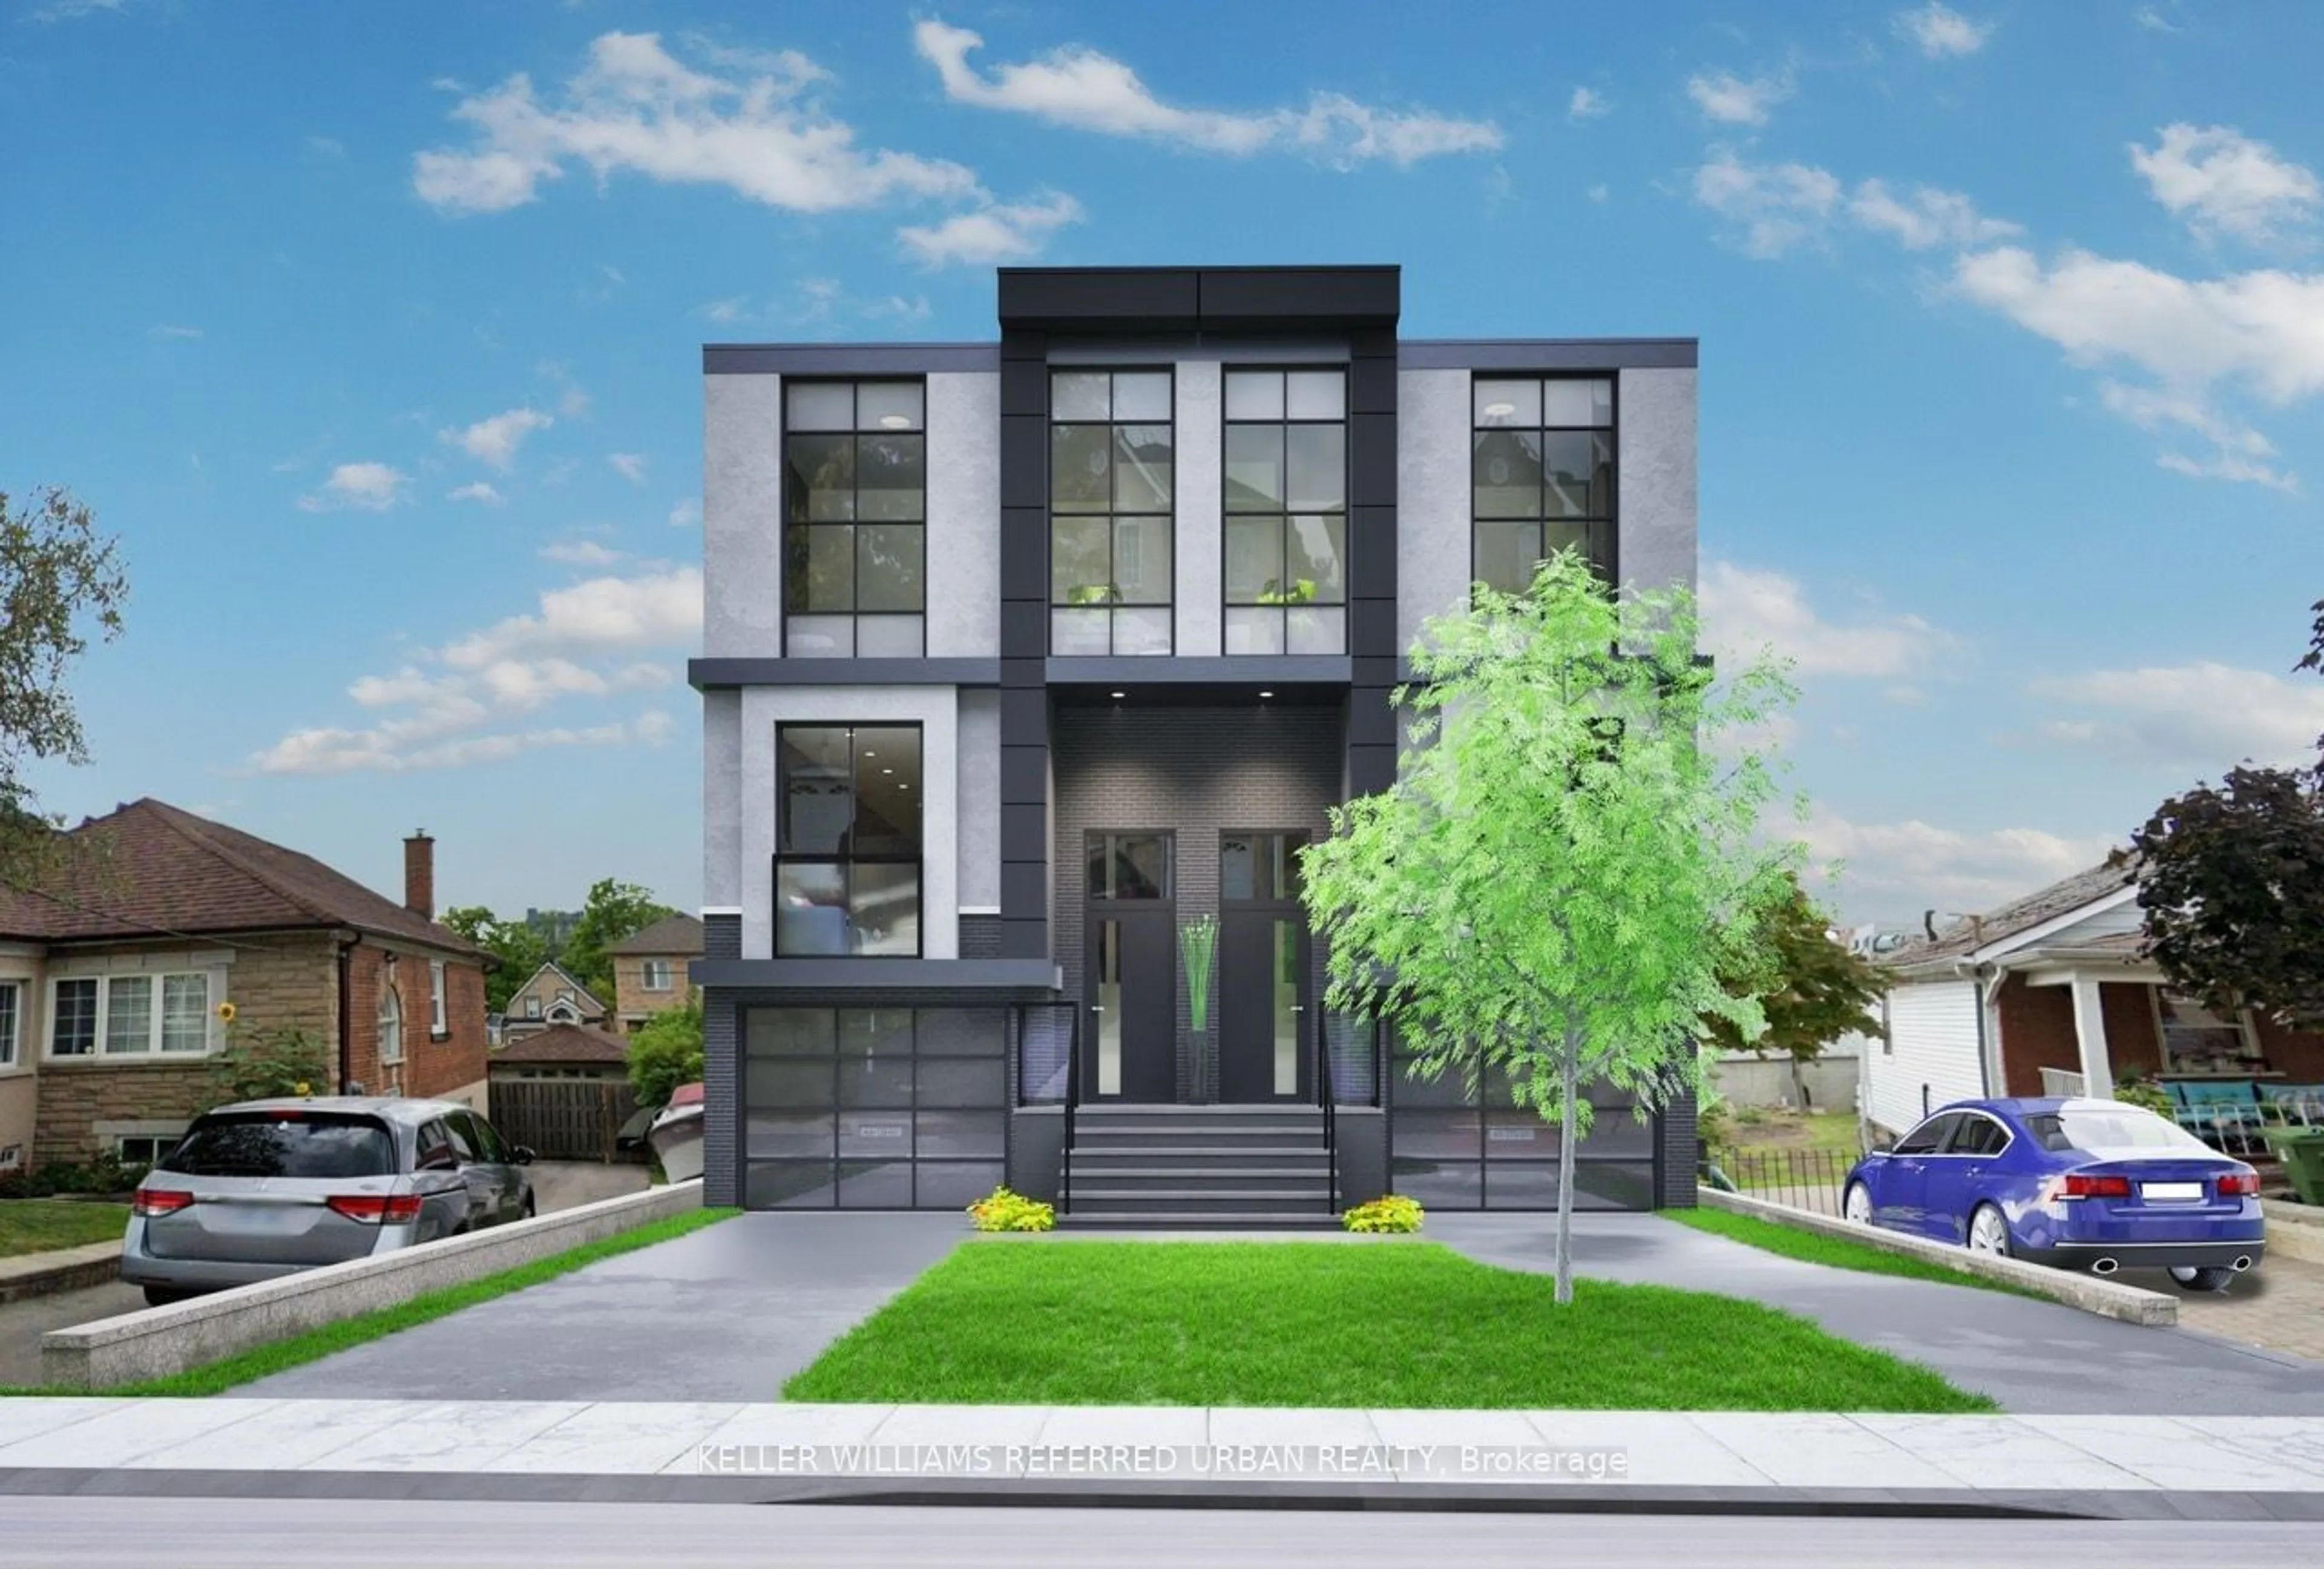 Home with brick exterior material for 66 Kane Ave, Toronto Ontario M6M 3M7